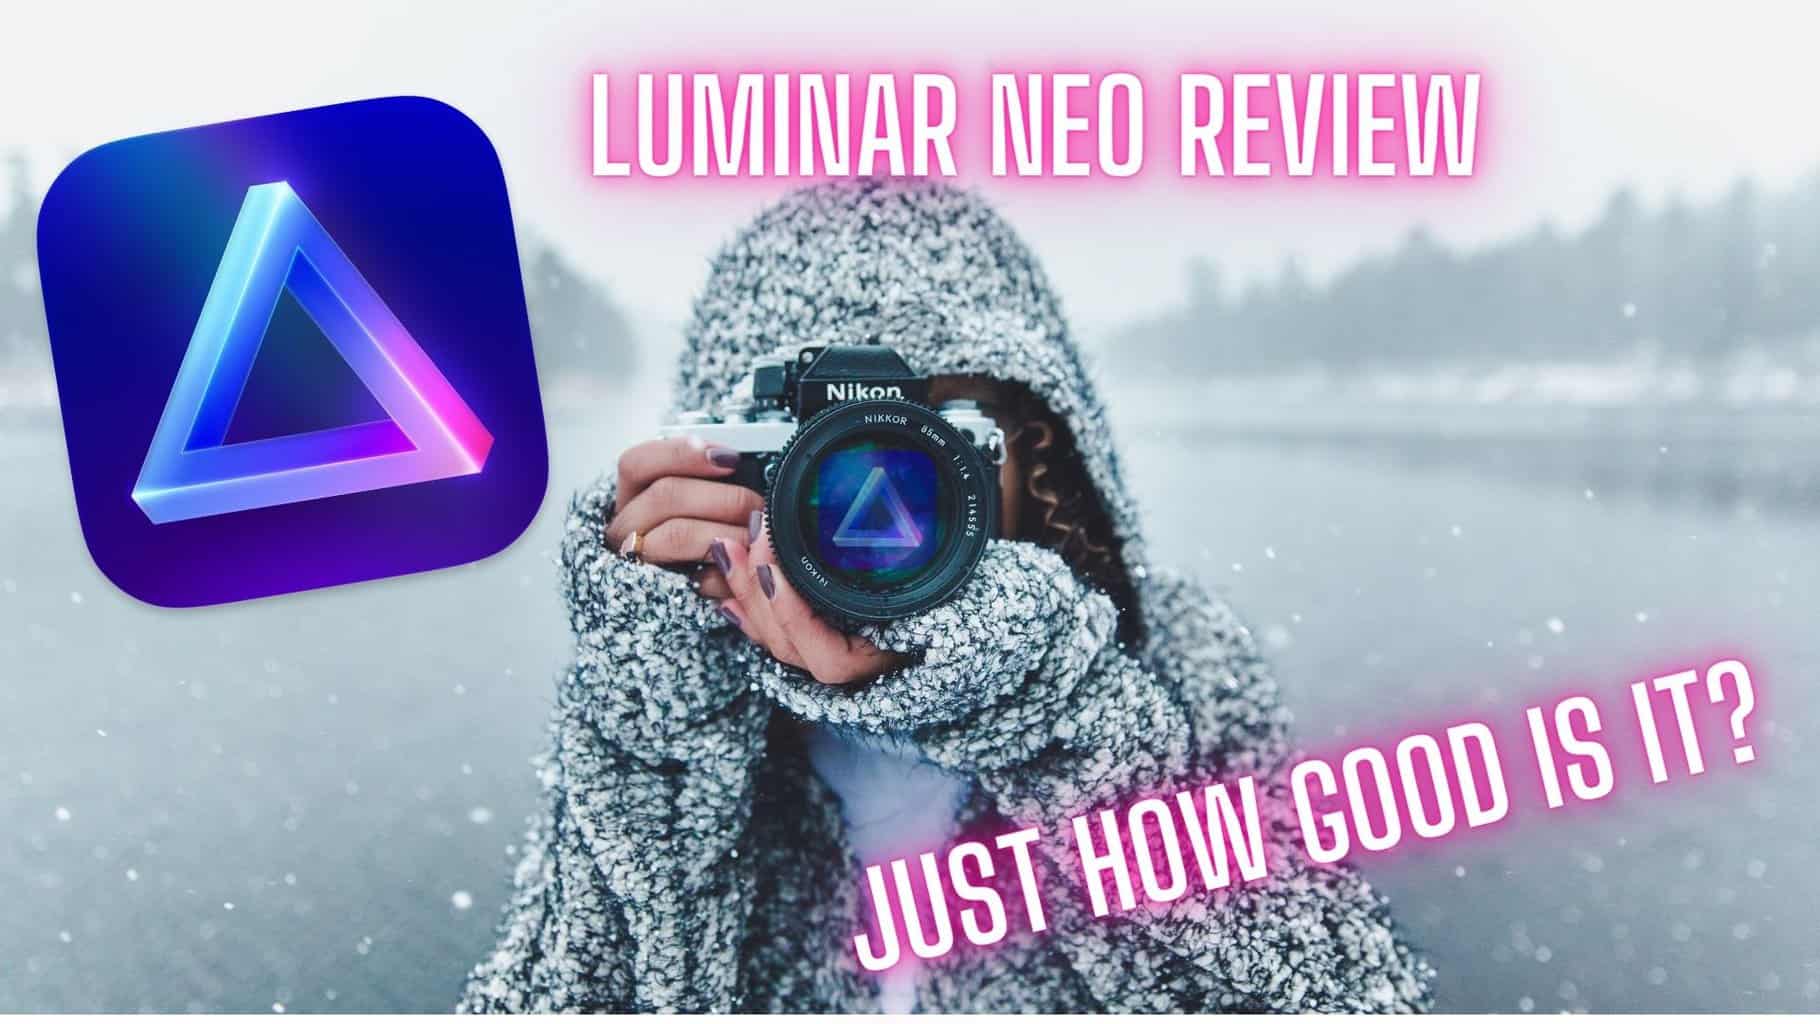 My full Luminar Neo Review and is it worth it?